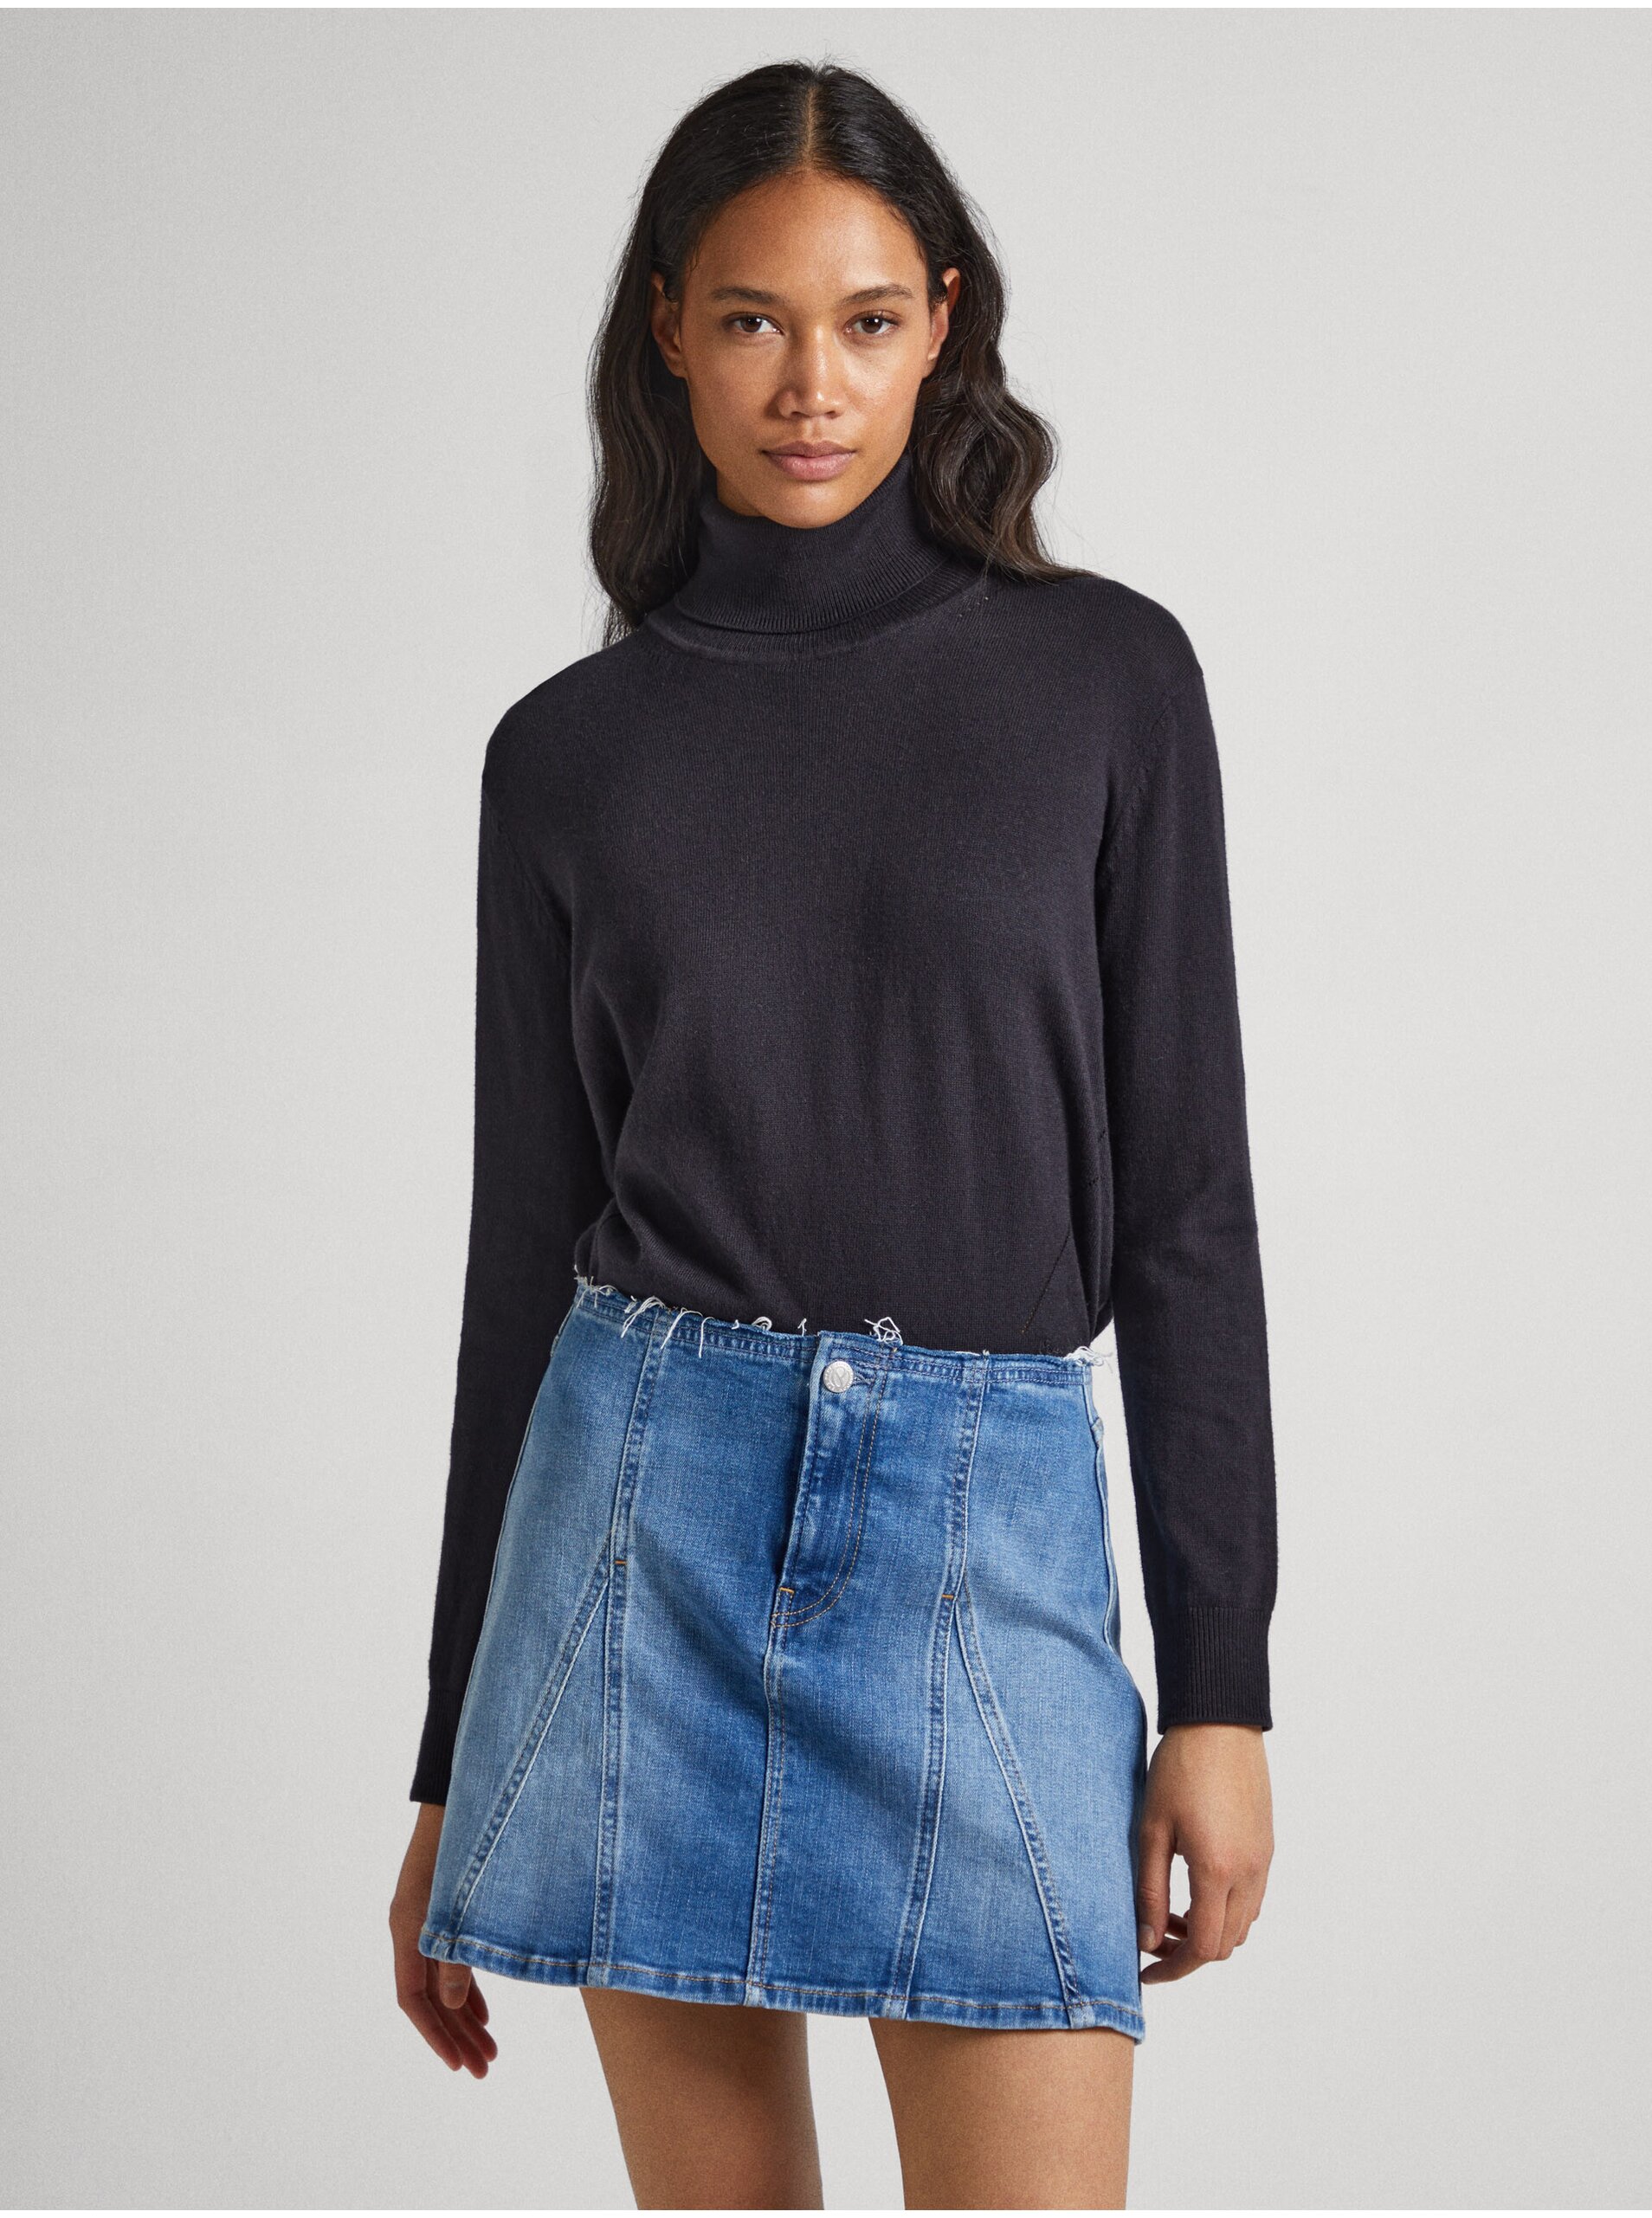 Pepe Jeans Donna Turt - Black women's turtleneck with wool and cashmere - Women